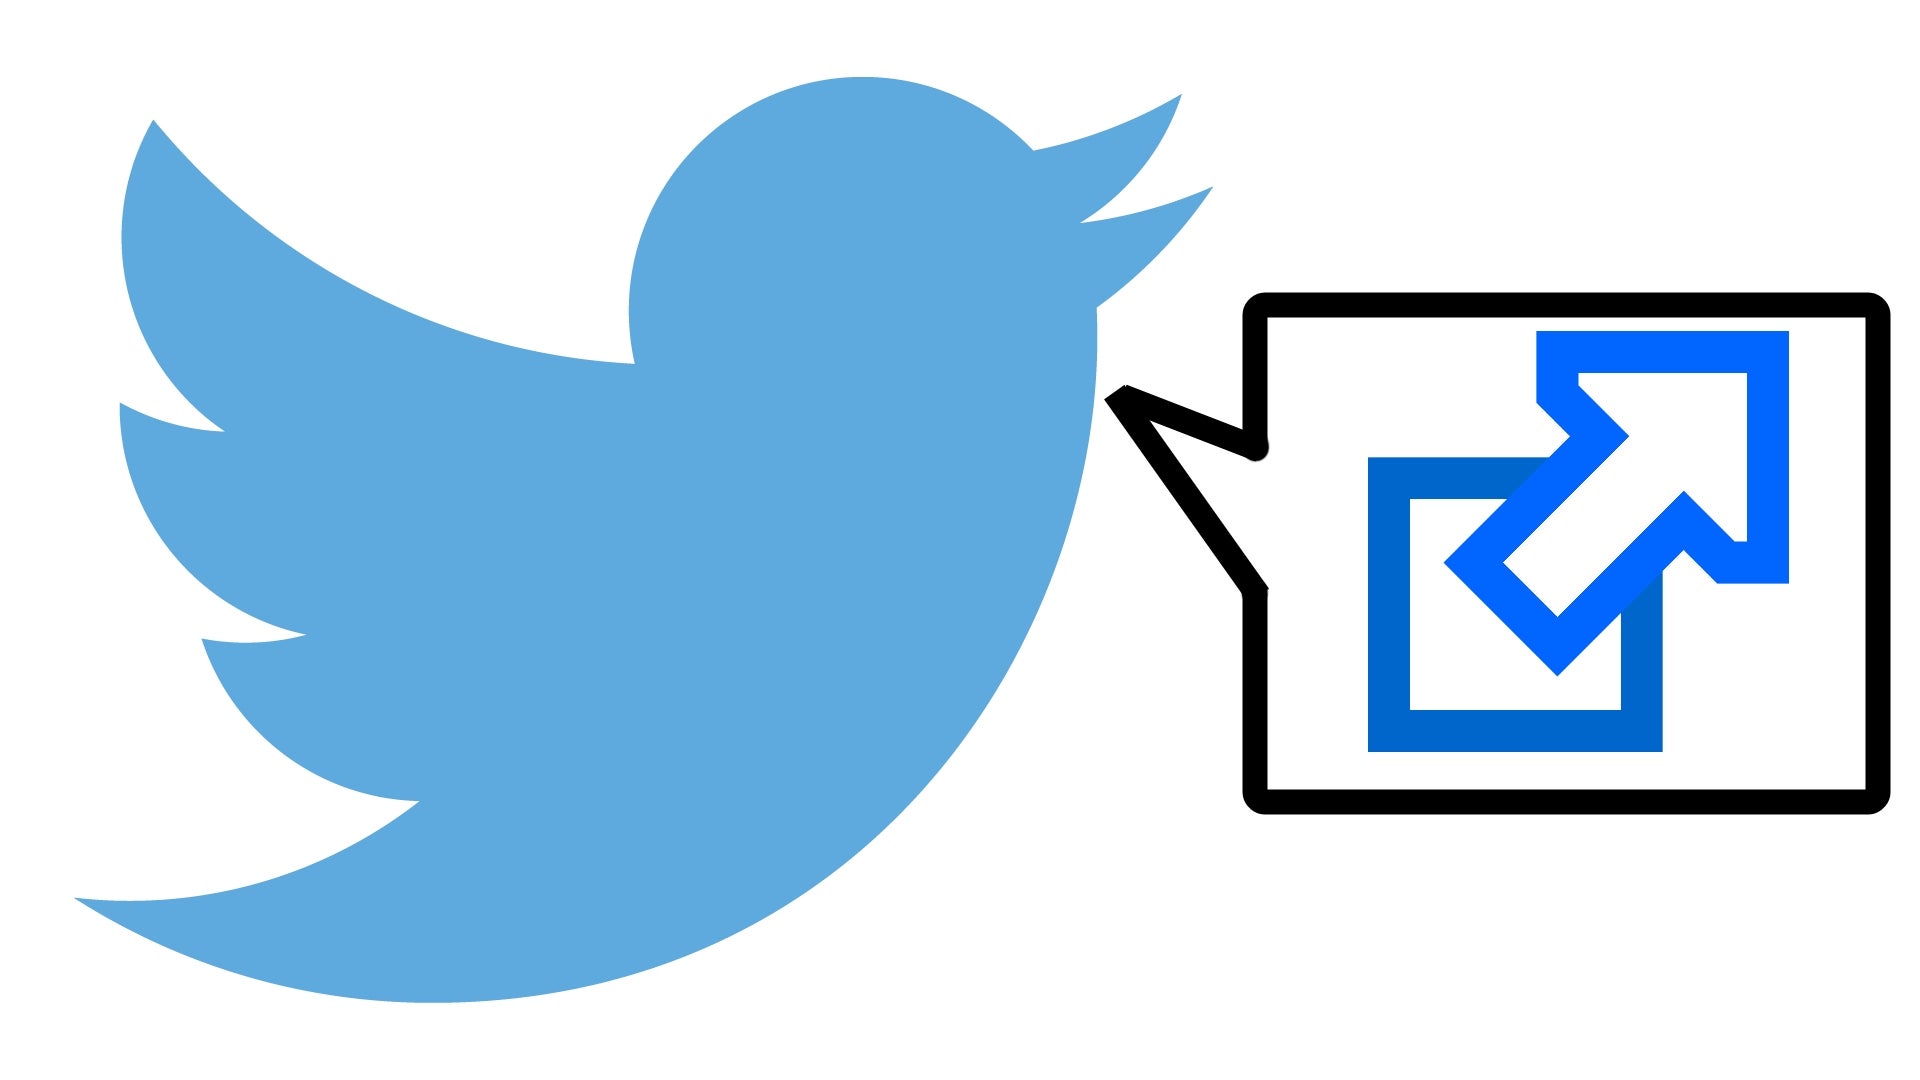 Use URL Shorteners To Bypass Twitter Restriction On Links In DMs